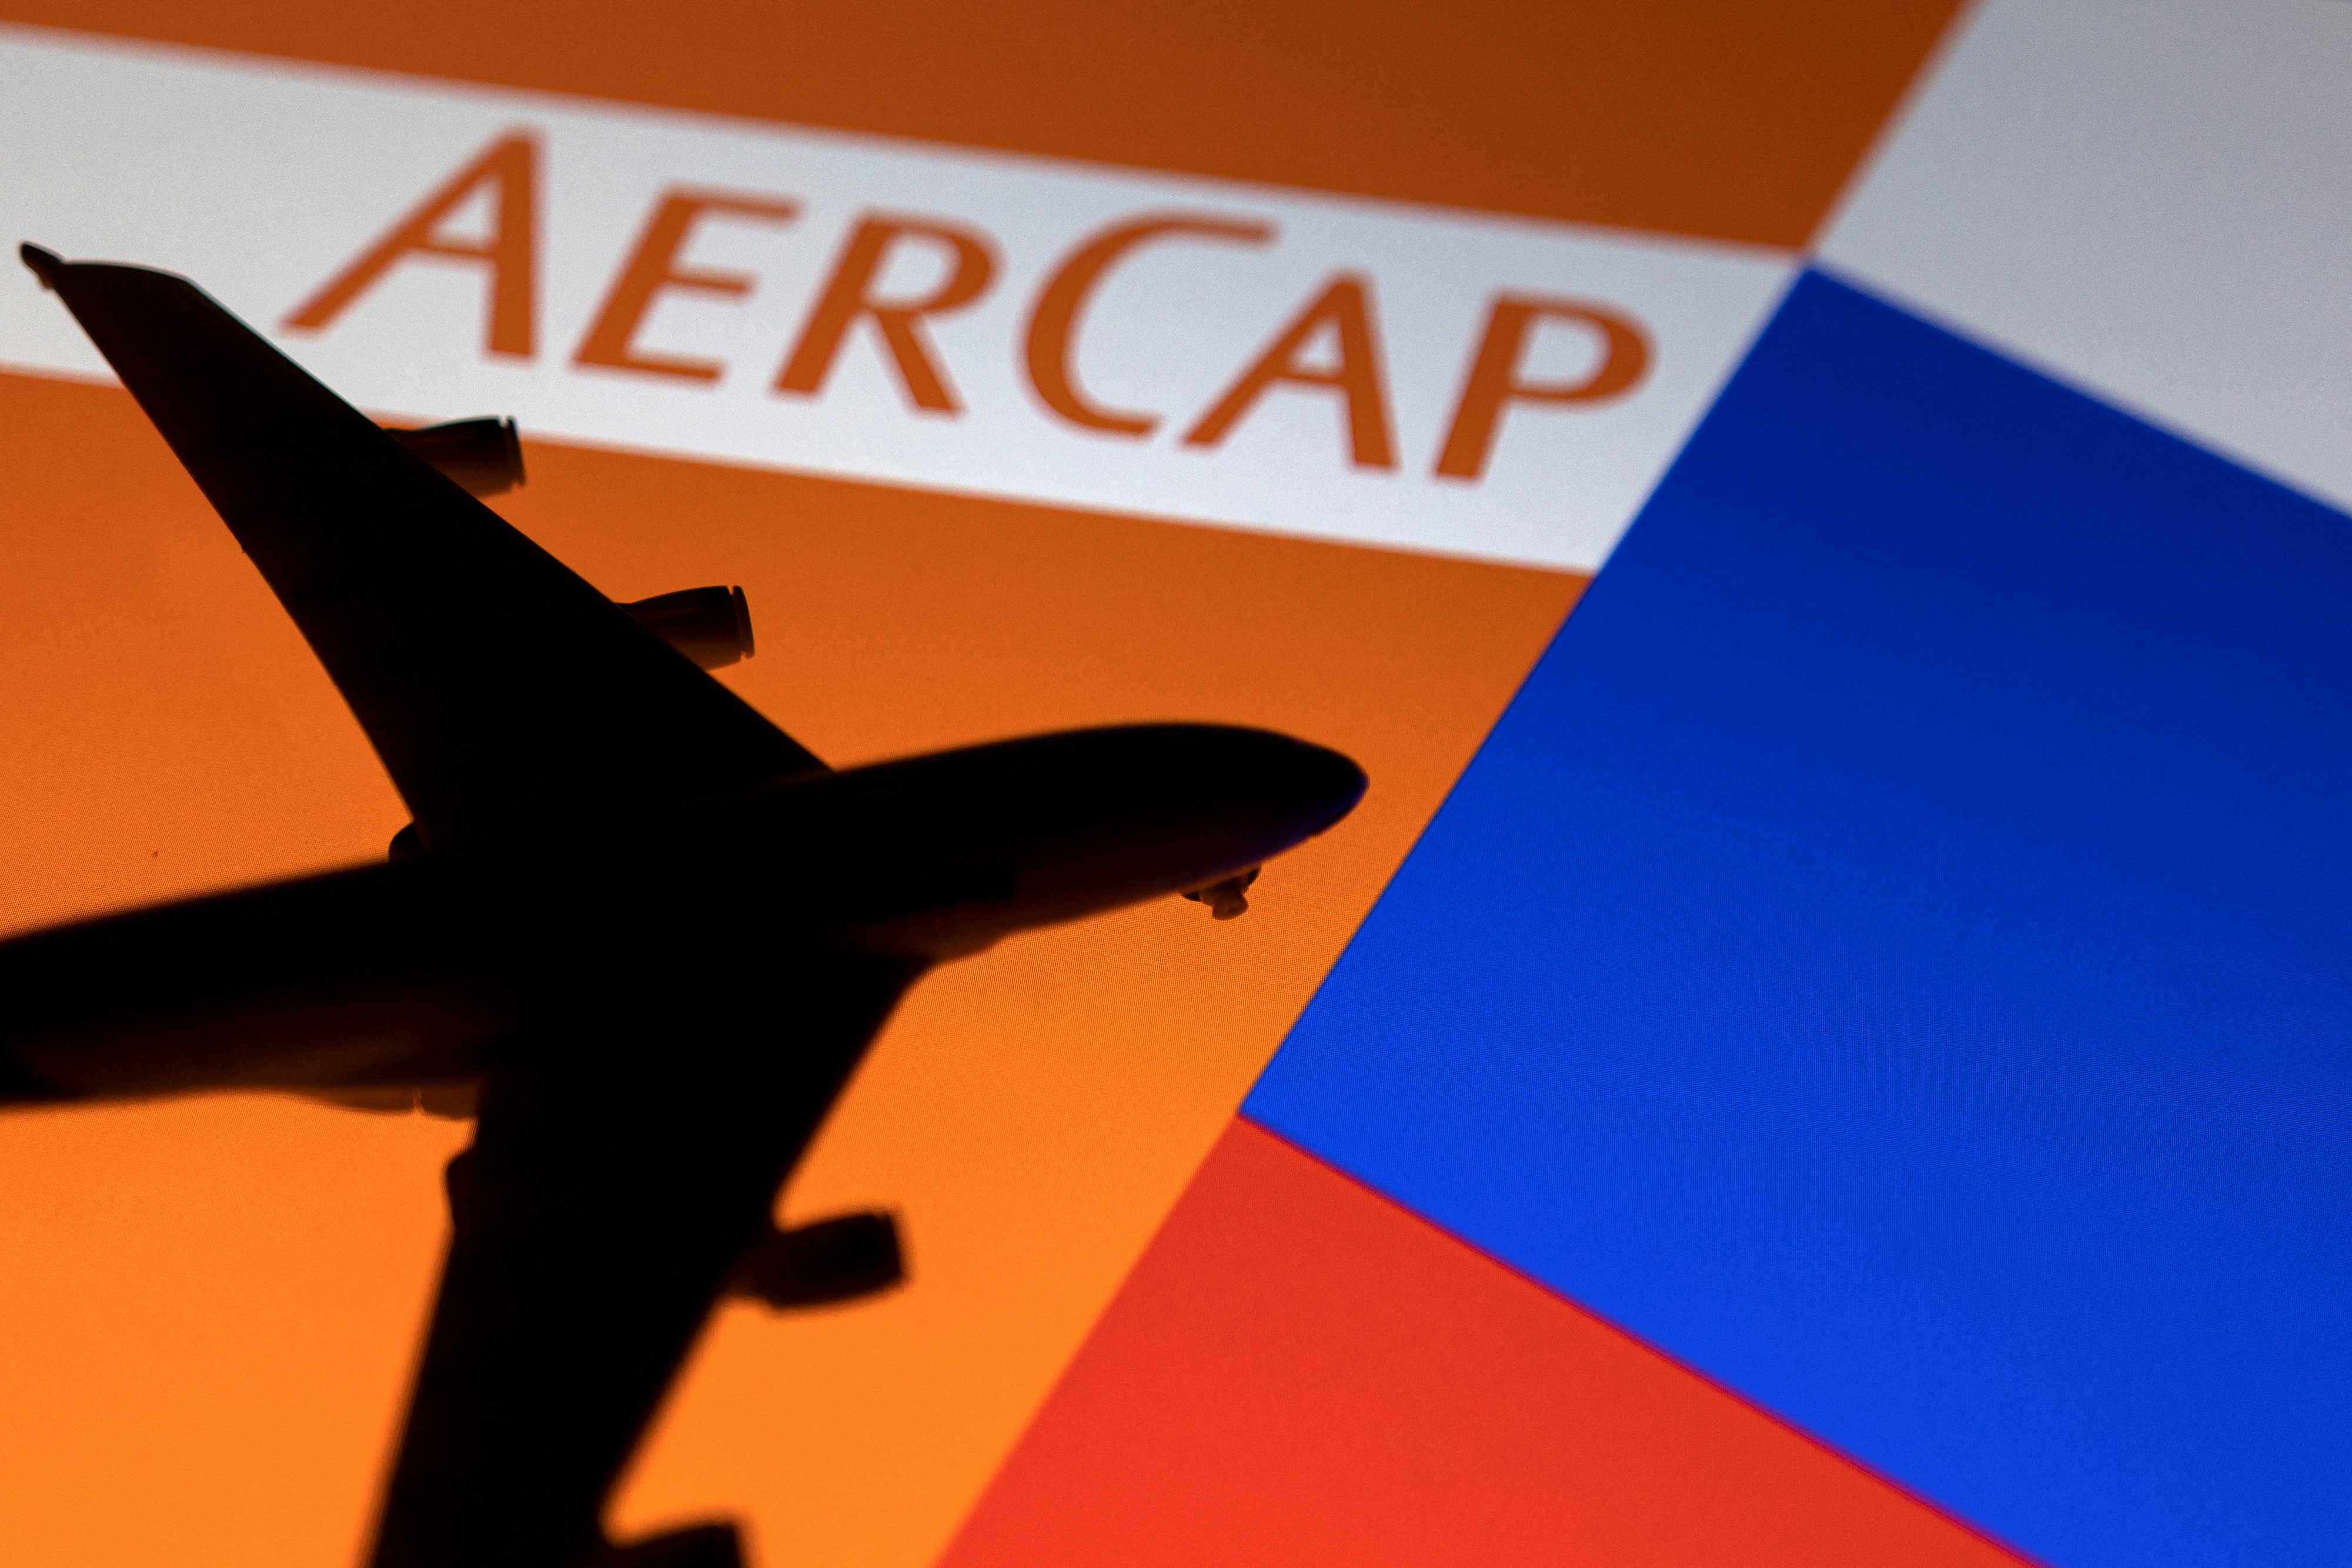 Illustration shows airplane model, AerCap logo and Russian flag colors